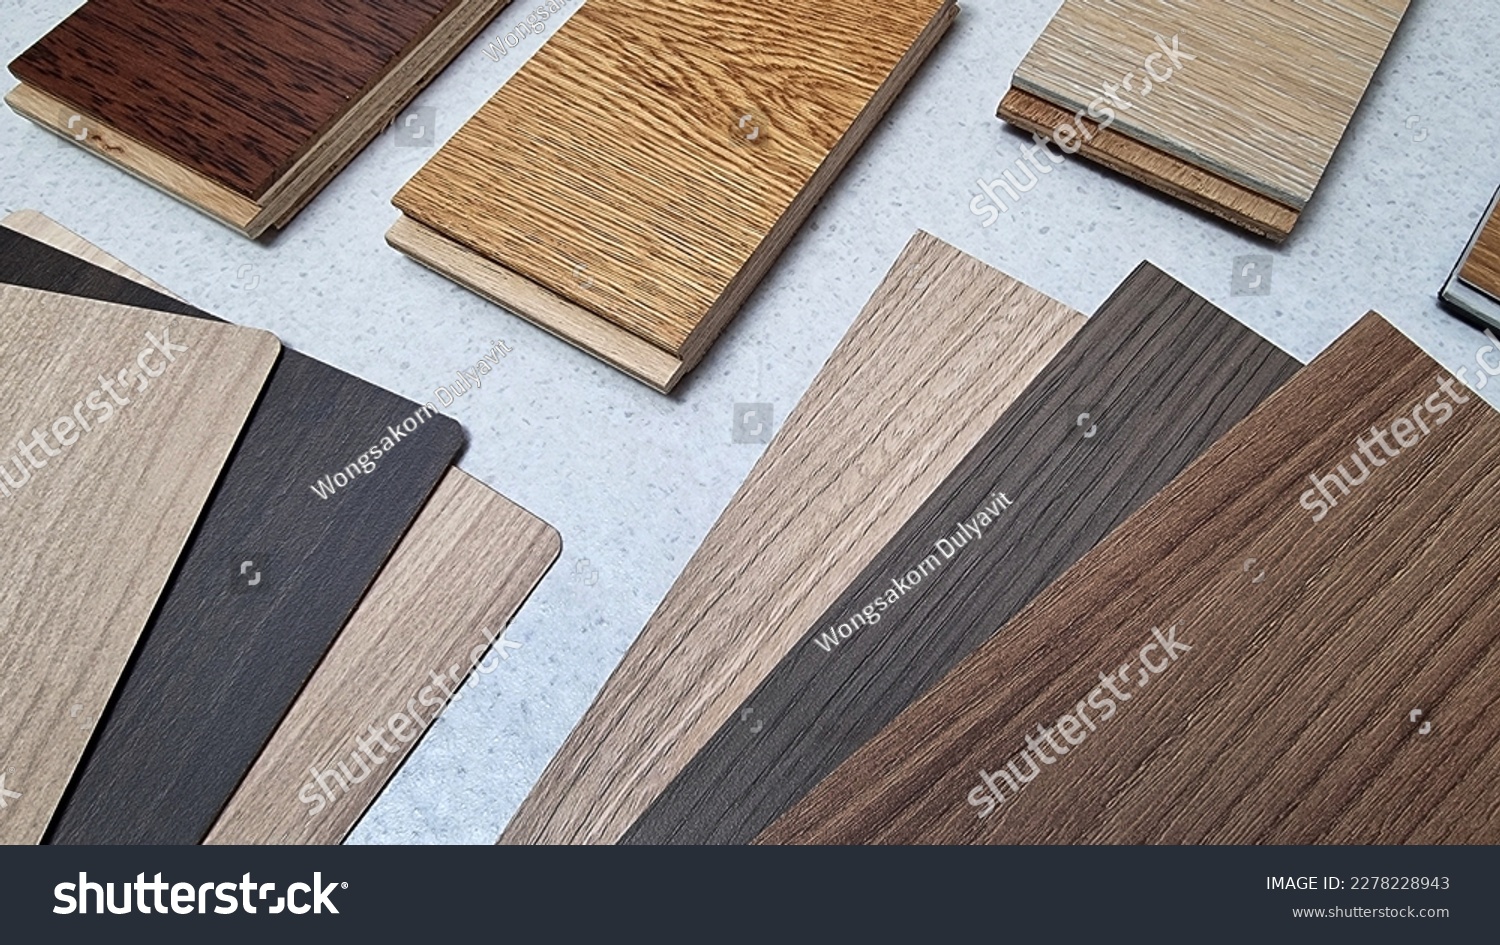 variety of wood texture for furniture and flooring furnishing material samples. interior material design samples in close up view. laminated, veneer, engineering wood flooring samples. #2278228943